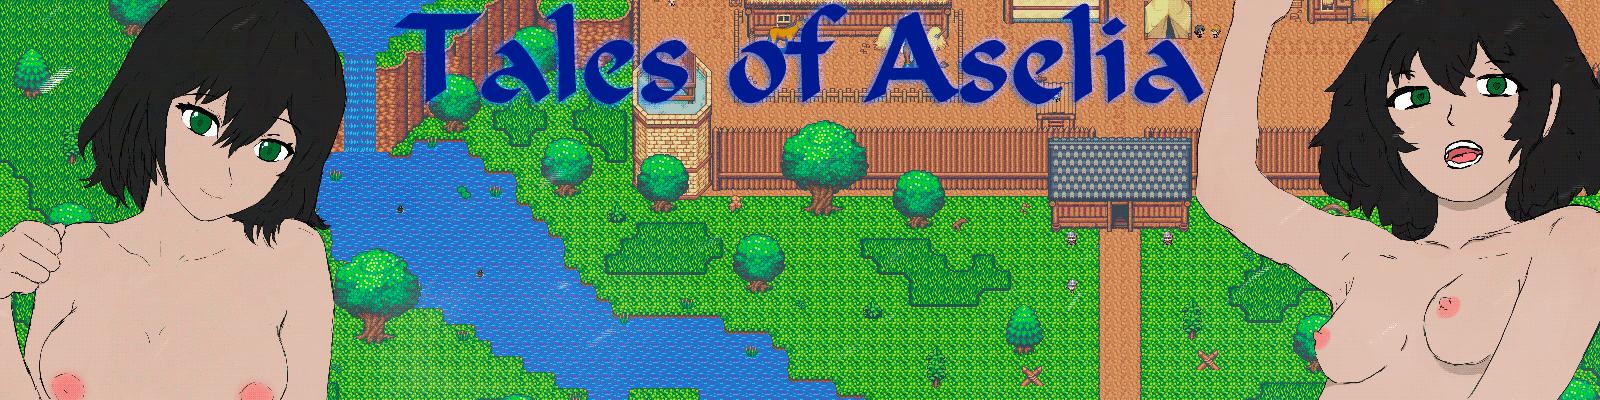 Tales of Aselia v0.0705 by masqetch